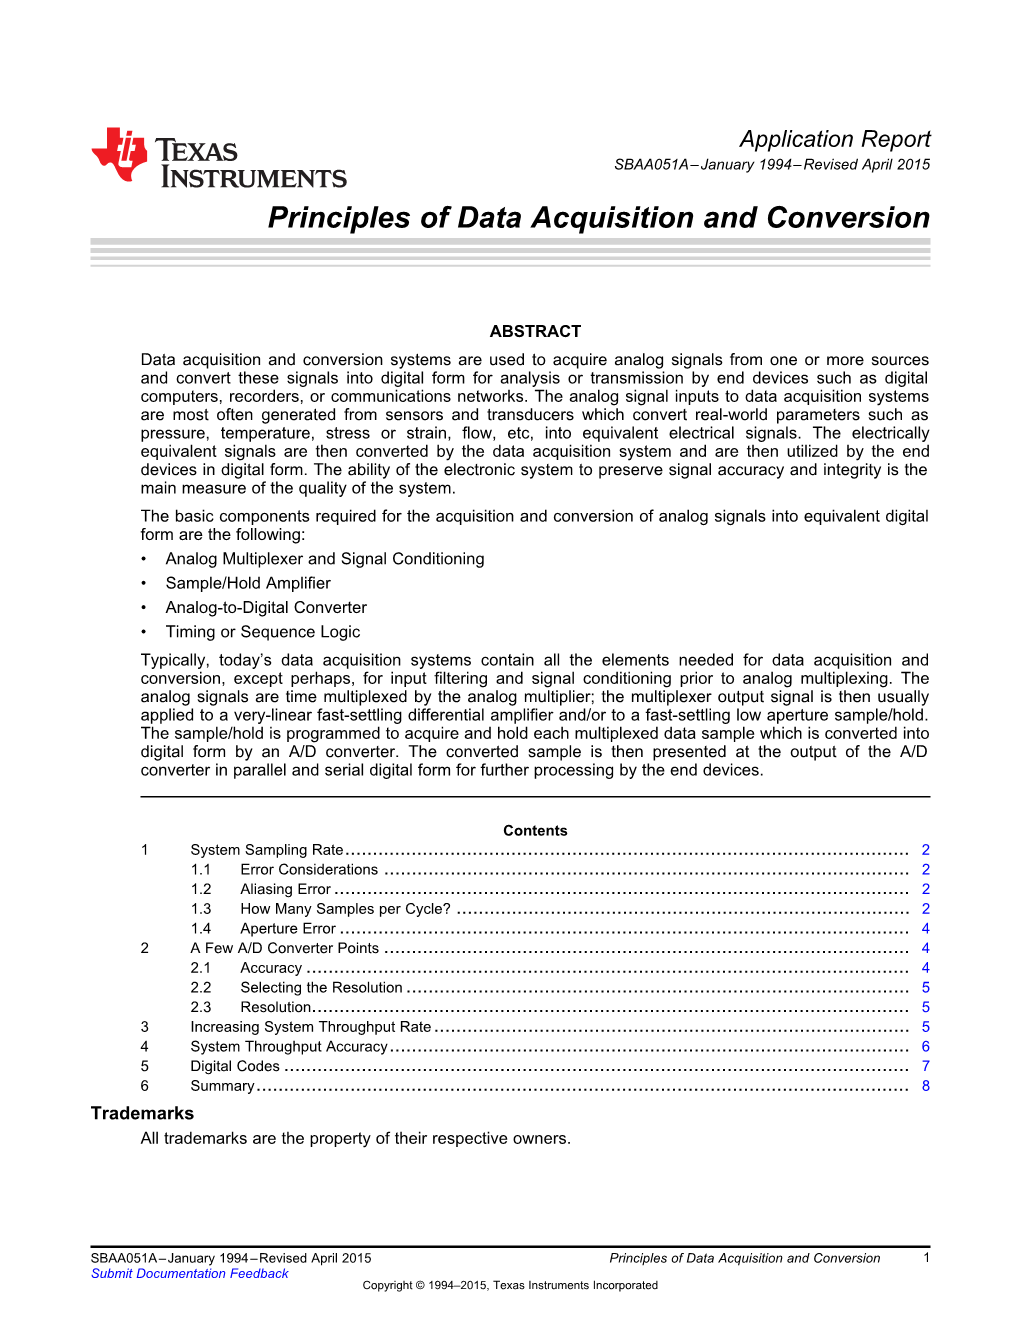 Principles of Data Acquisition and Conversion